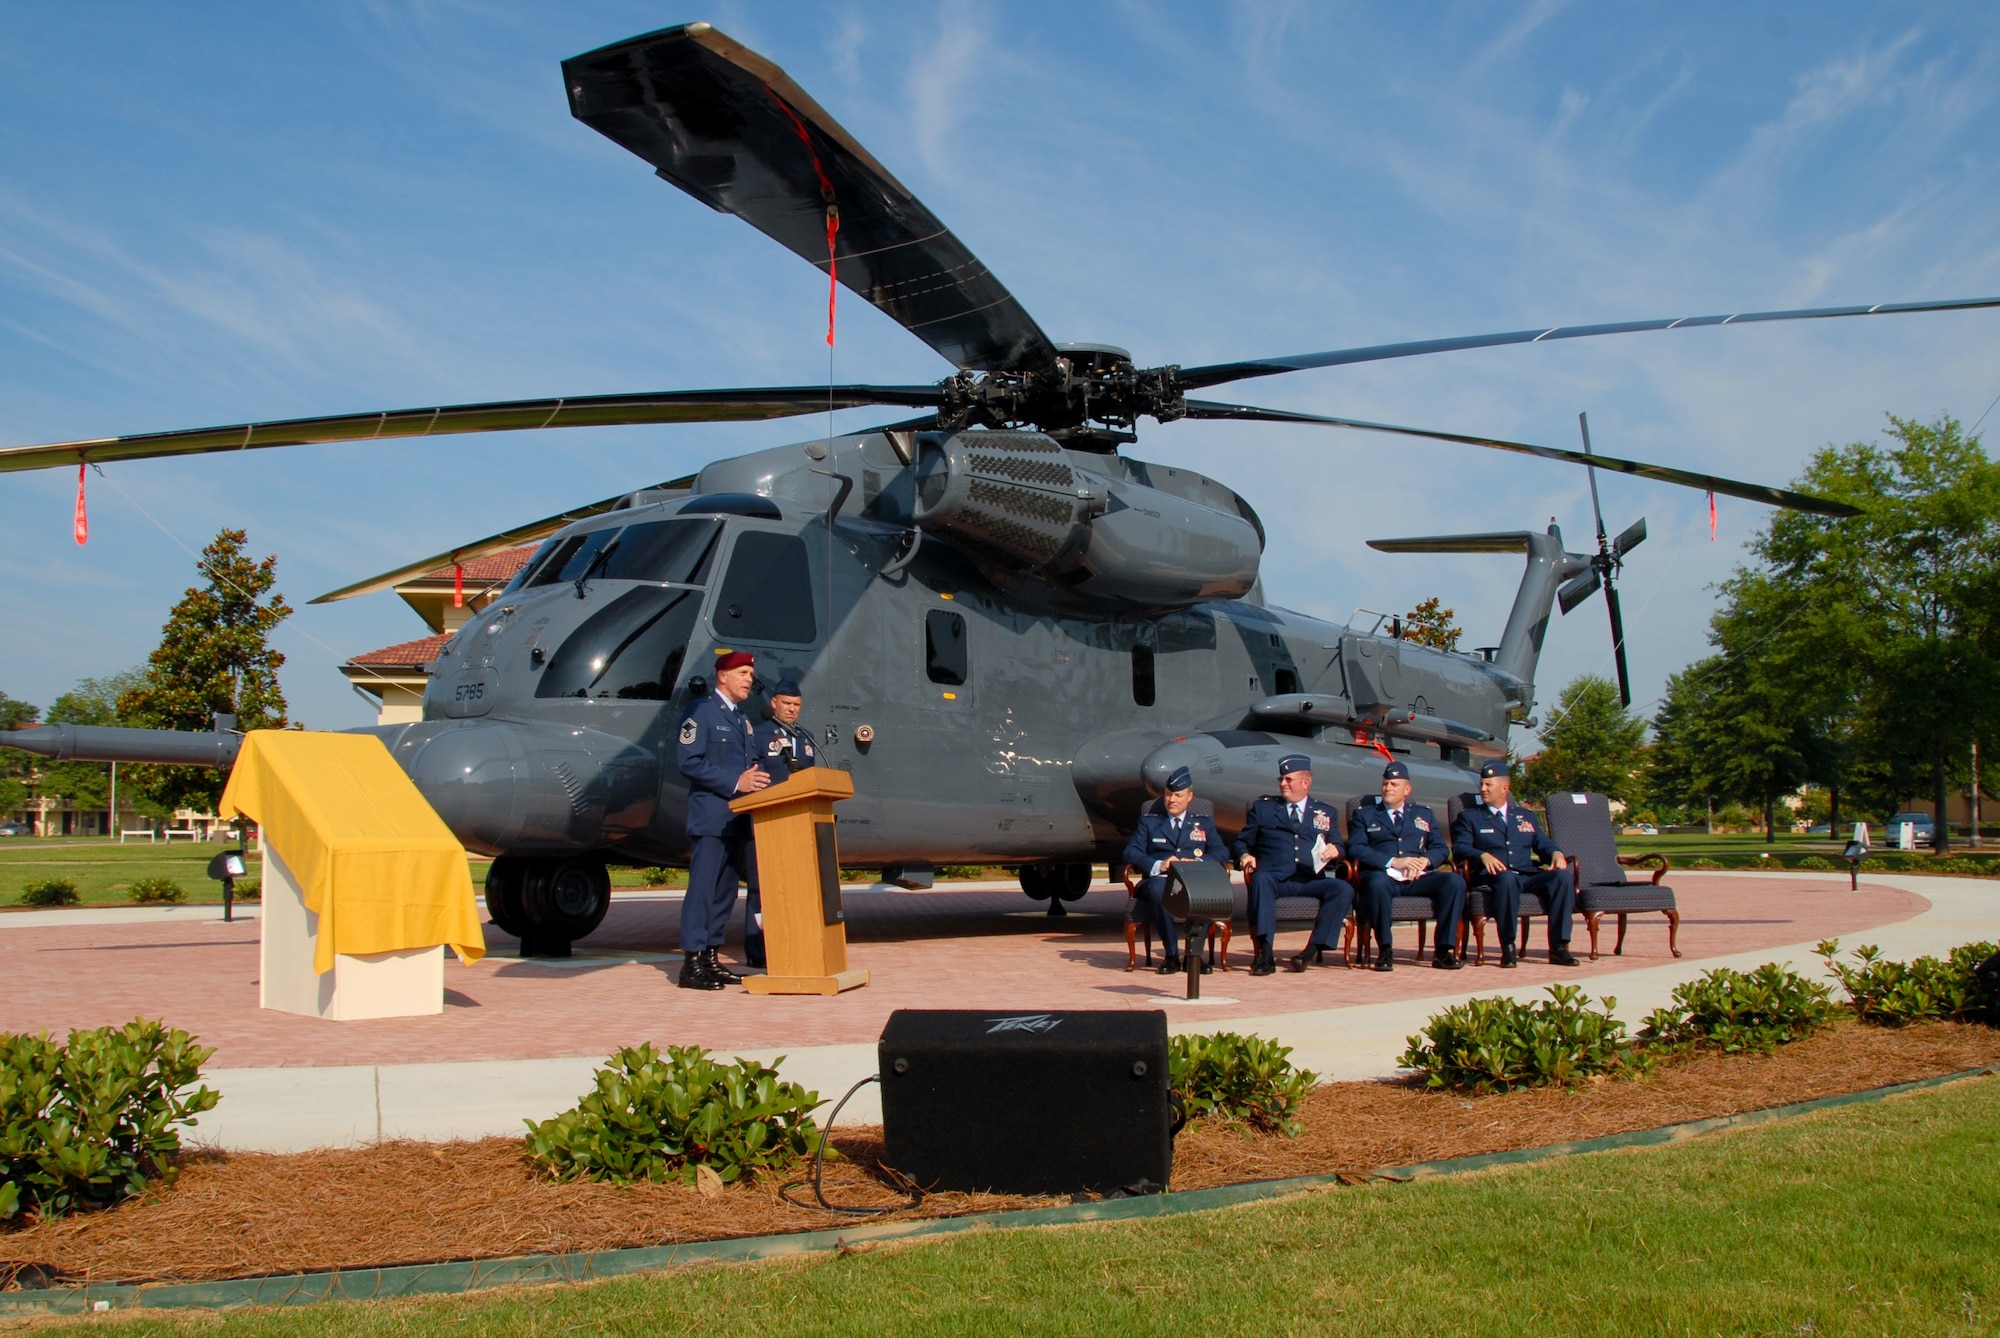 An “old war bird” was dedicated Monday when a ceremony for Air Force Pave Low #69-5785, or 785, was held at Maxwell’s Air Park. The static display at the corner of Ash and Twining Streets commemorates the Airmen who flew the helicopters first assigned to the Air Force in 1970. Retired Chief Master Sgt. Wayne Fisk, a pararescue jumper who flew on 785 many times, told the audience about the aircraft and his association with it. On the right, Lt. Gen. Allen Peck, Air University commander, Brig. Gen. Tom Trask of Air Force Special Operations Command, Col. Kris Beasley, 42nd Air Base Wing commander, and Maj. Brian Roberts, who flew 785 on her last flight, listened to Chief Fisk’s speech. (U.S. Air Force photo/Jamie Pitcher)